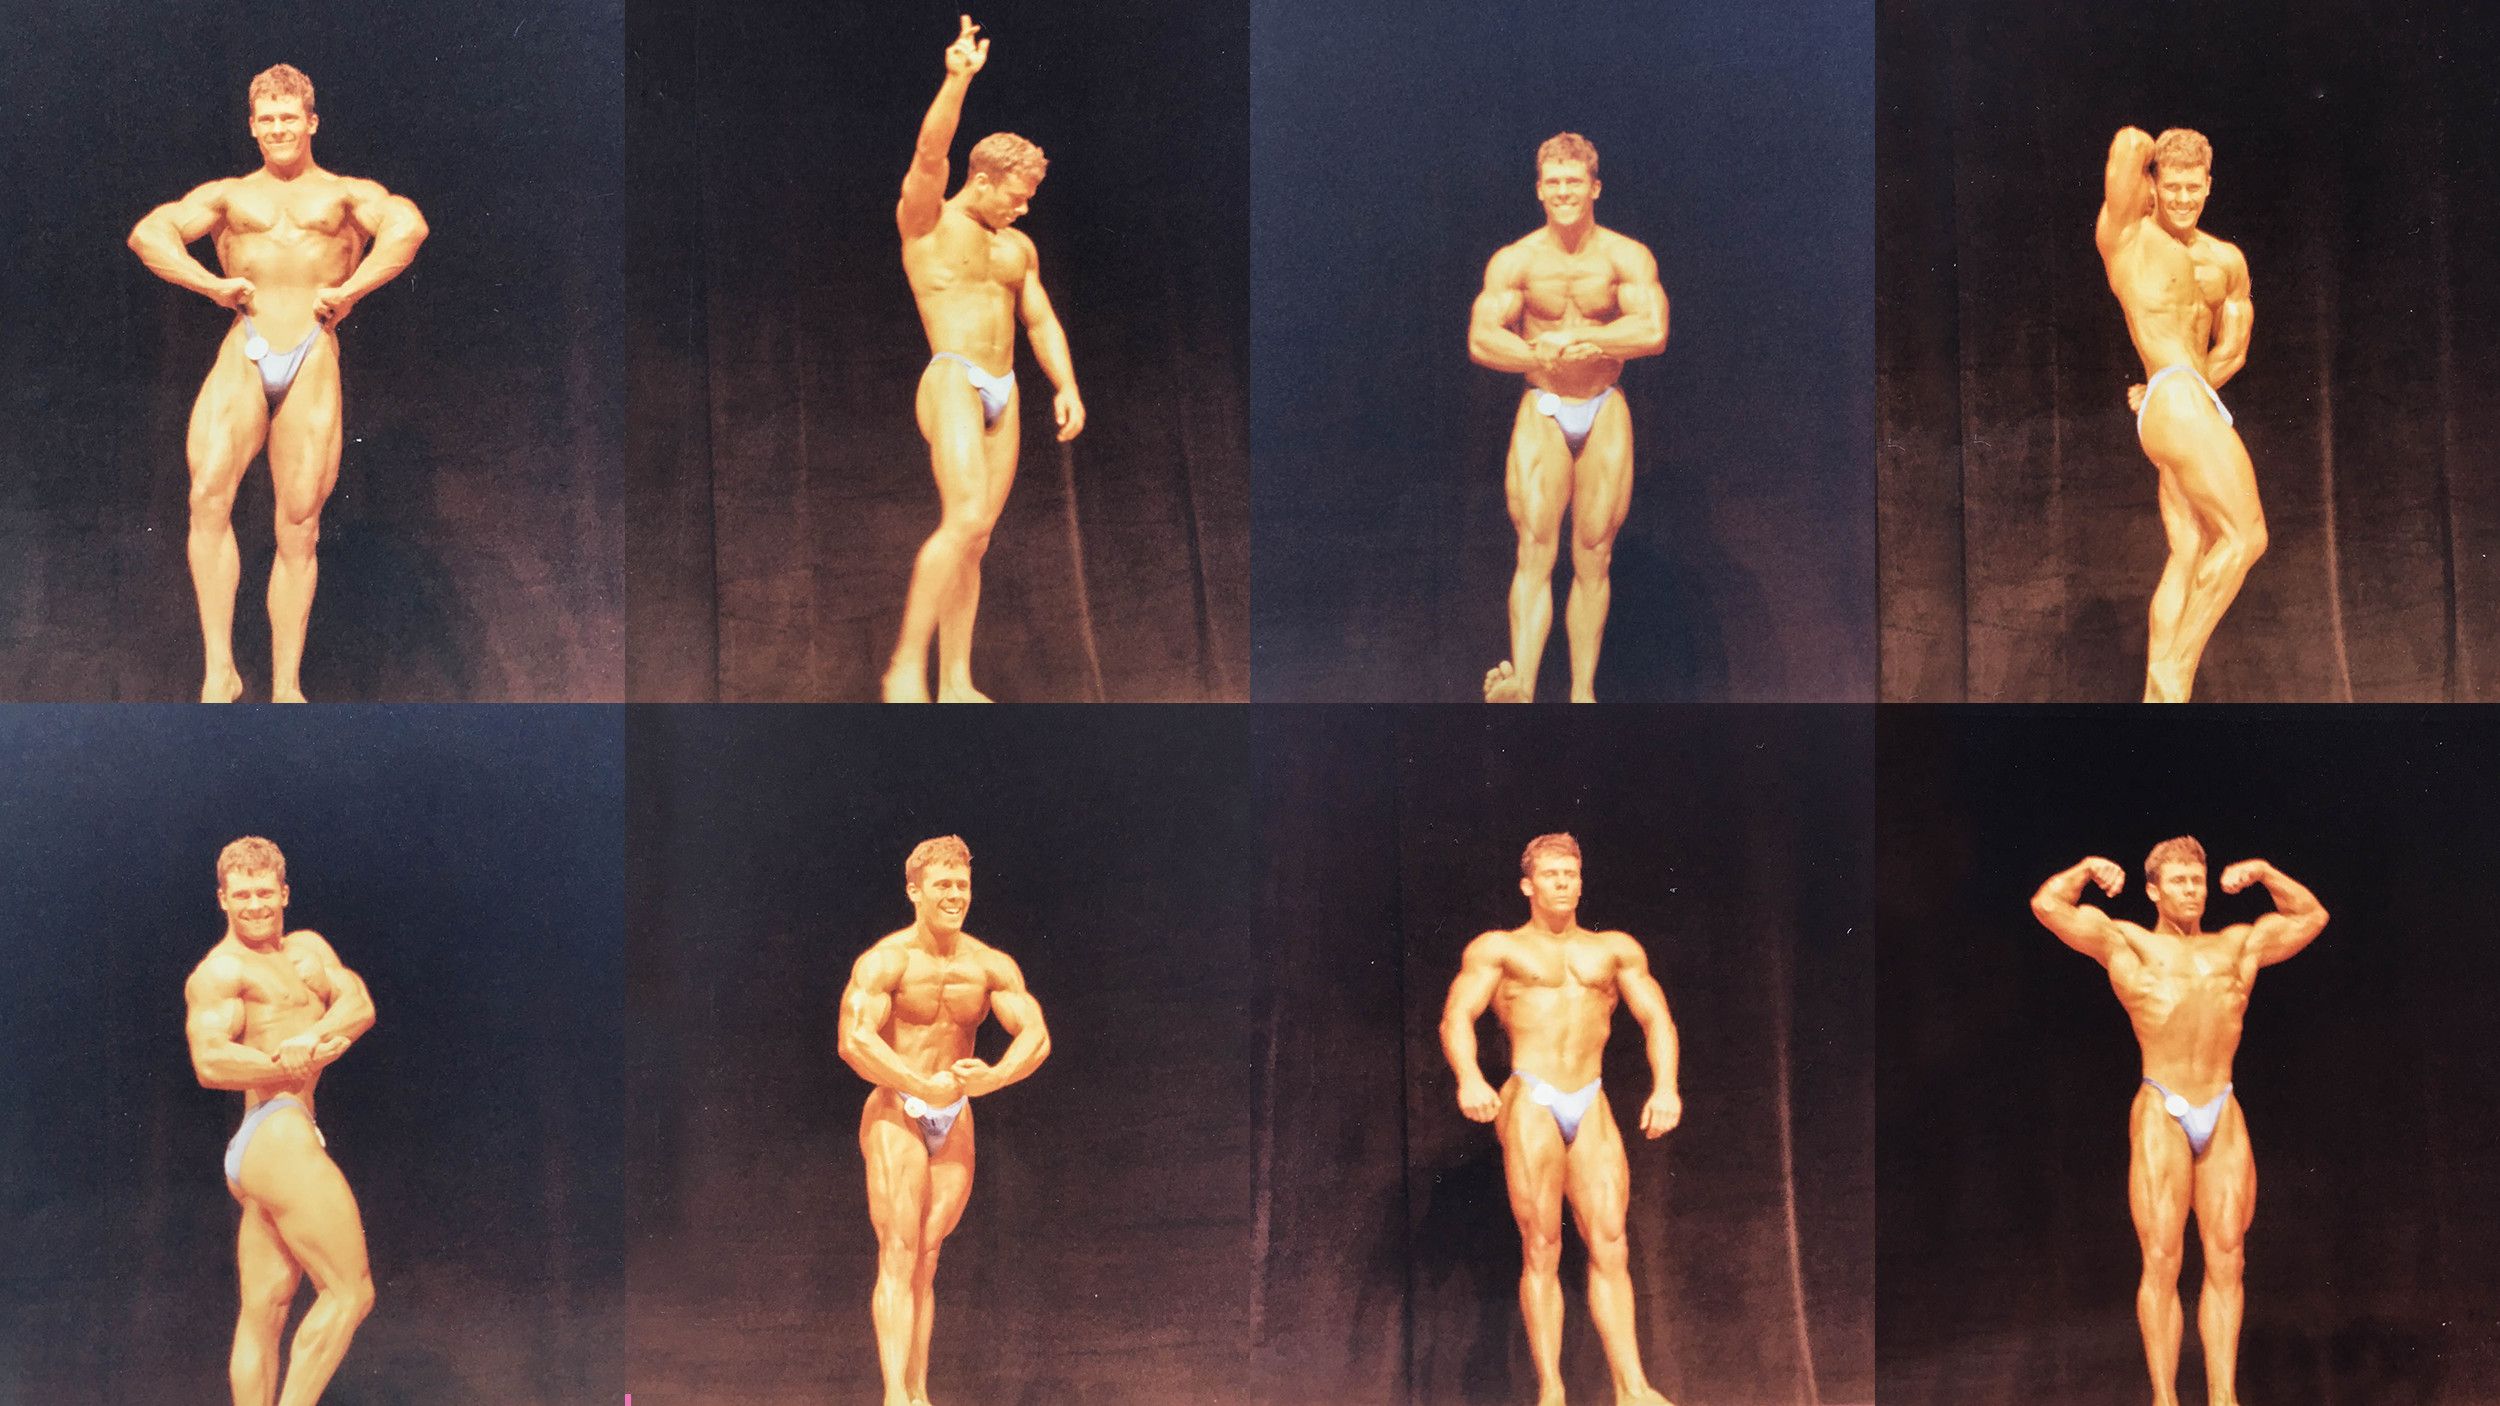 Ripped My Life as a Competitive Bodybuilder